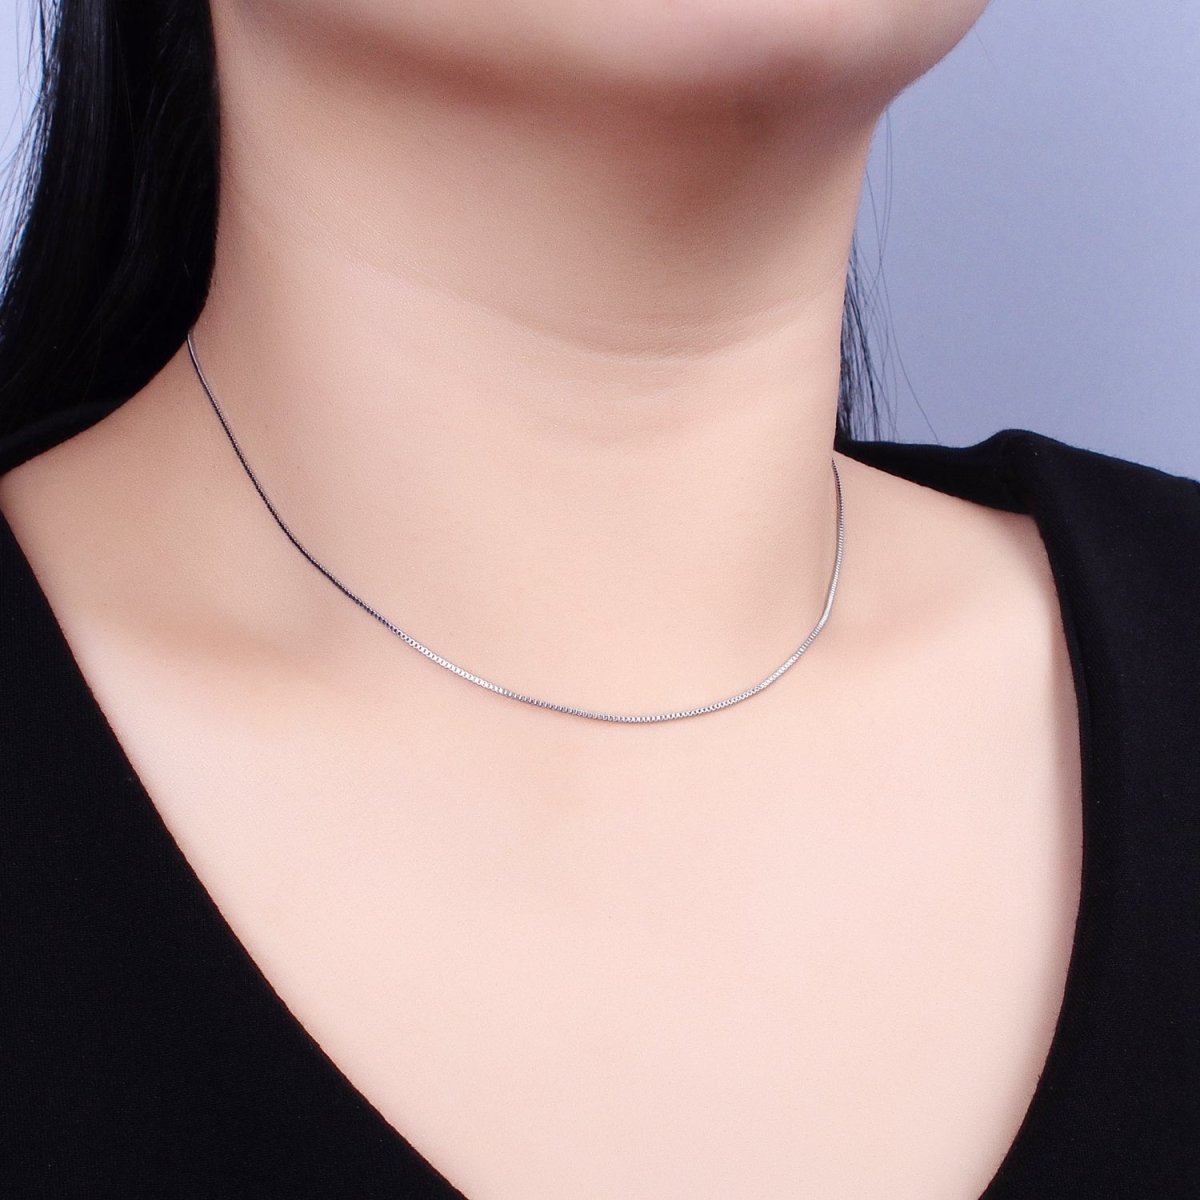 Dainty Box Chain Necklace 19.6 inch Long Ready to Wear Necklace in Silver | WA-1679 Clearance Pricing - DLUXCA